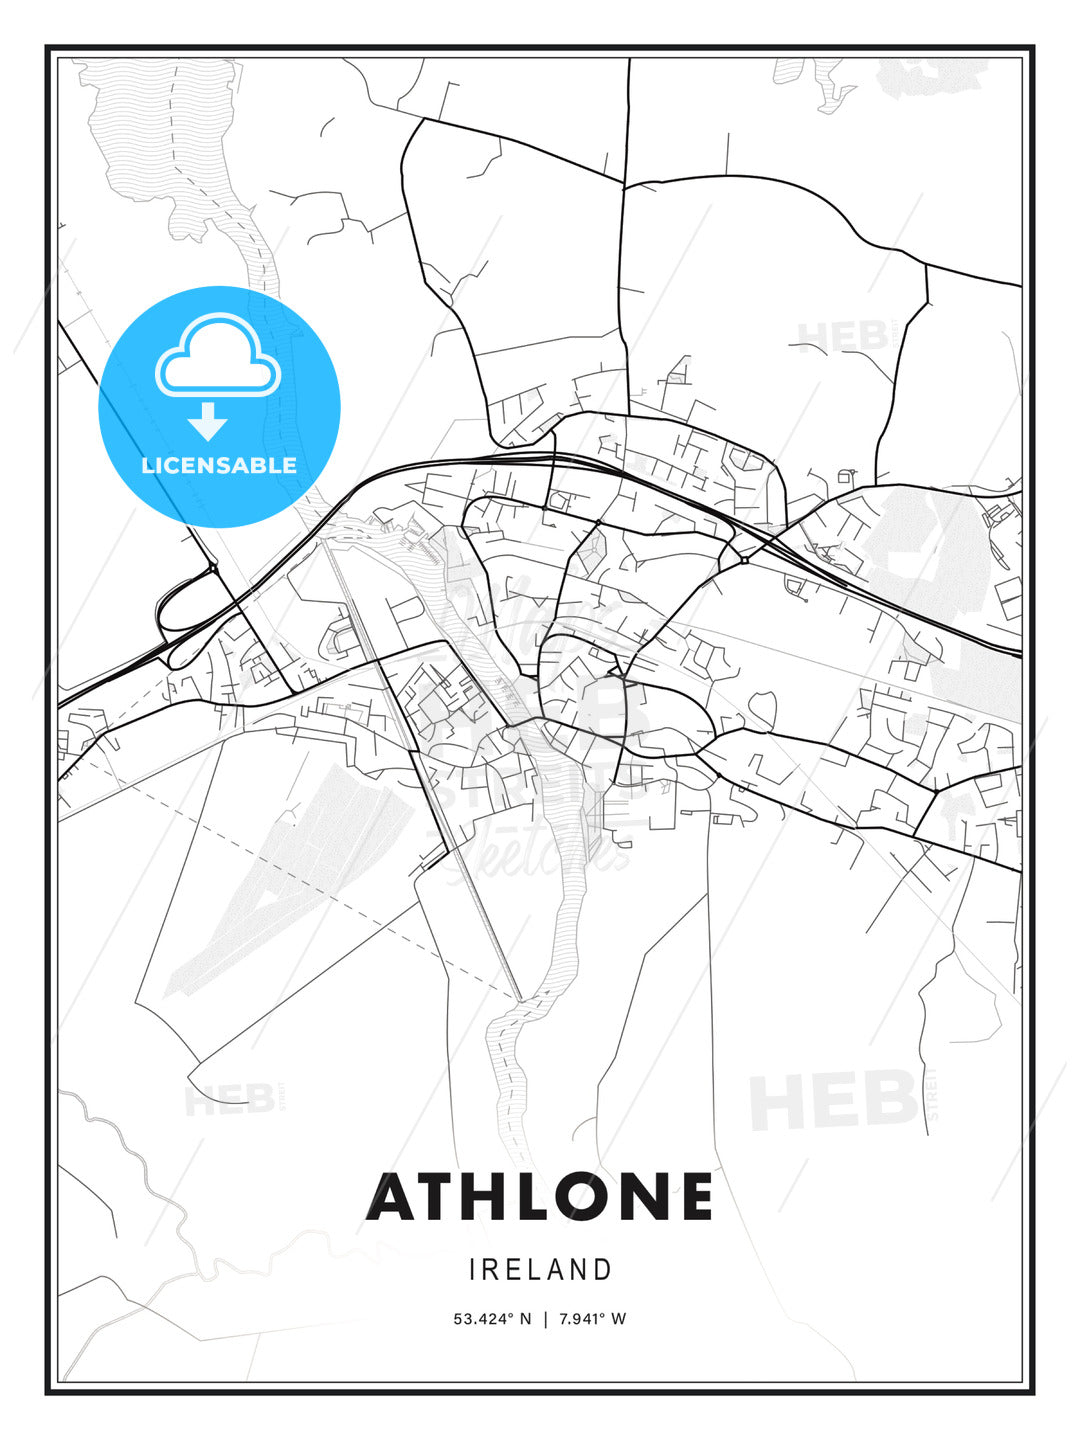 Athlone, Ireland, Modern Print Template in Various Formats - HEBSTREITS Sketches